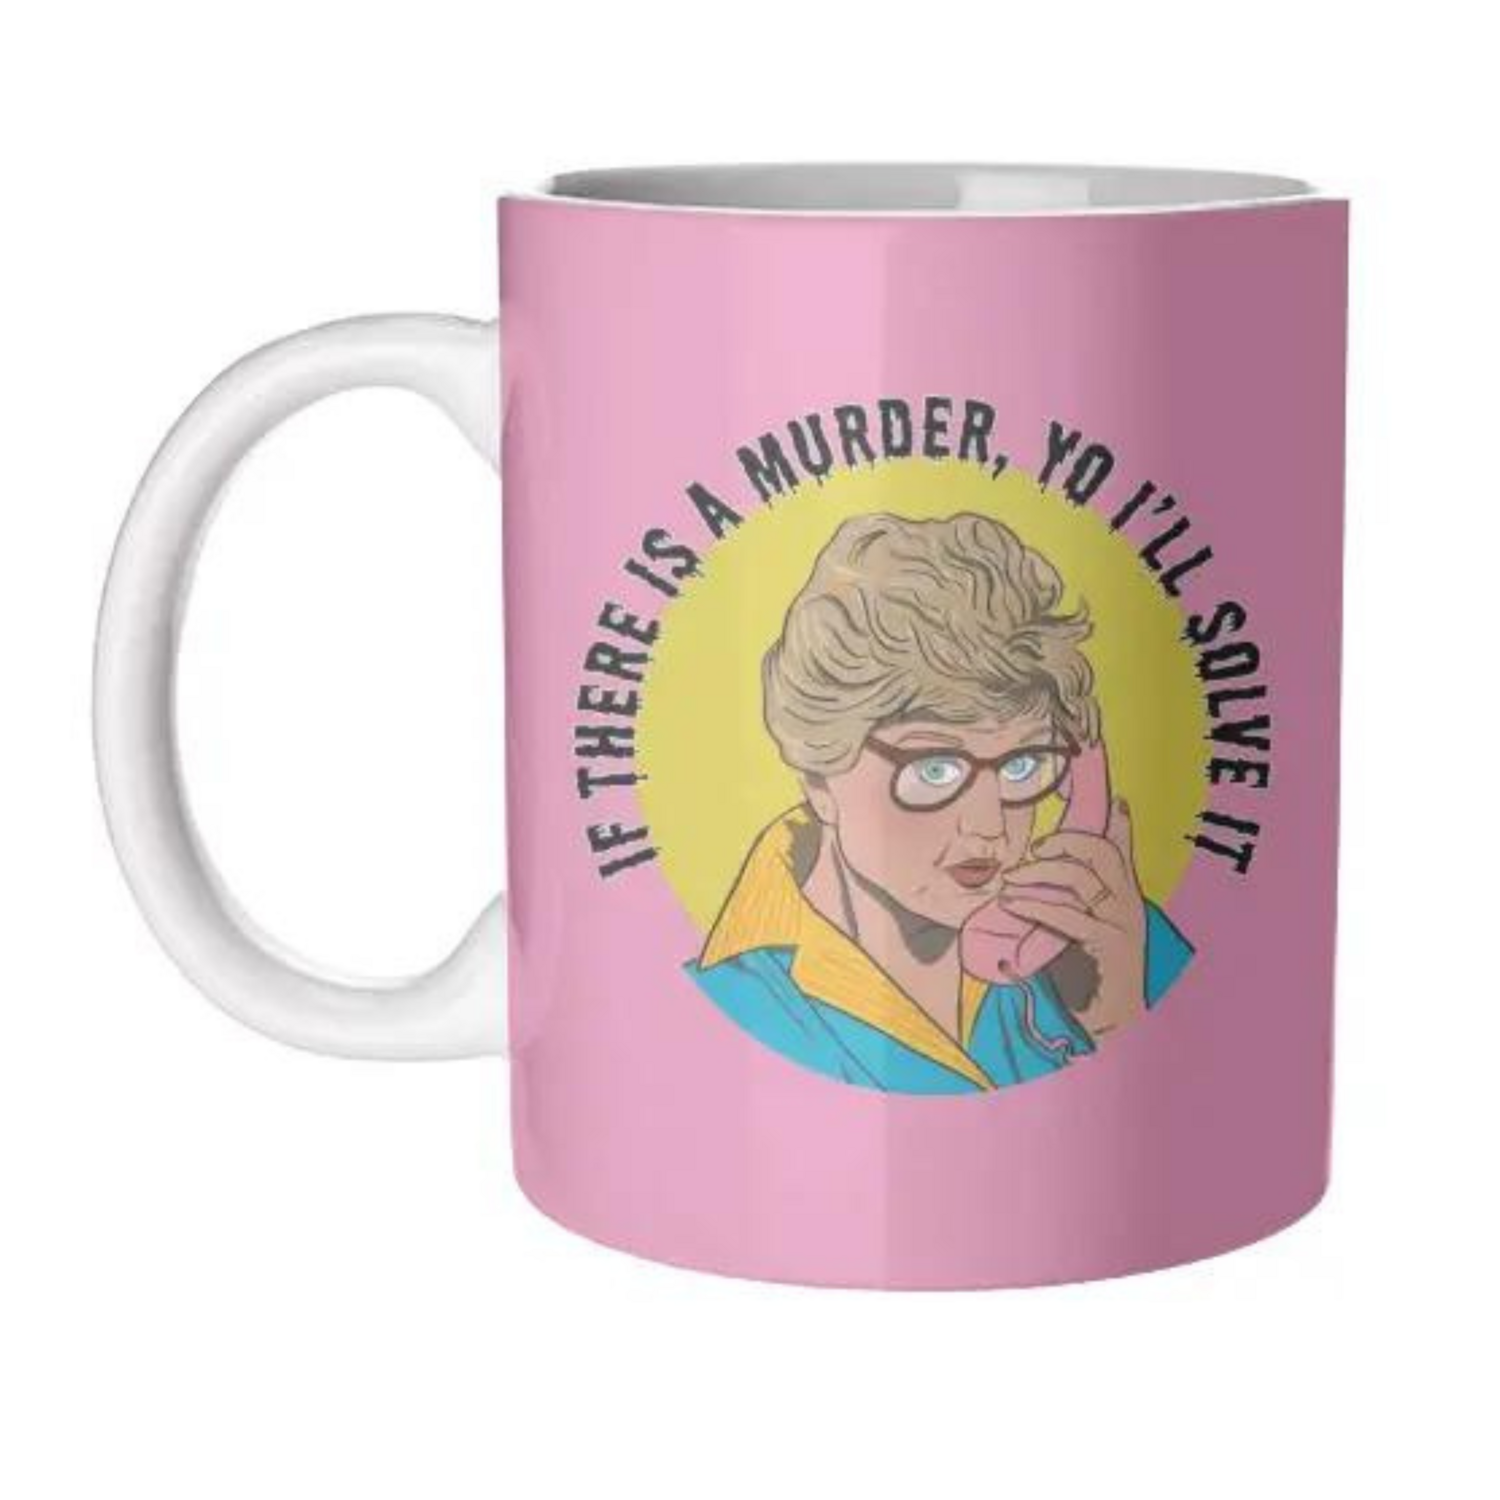 IF THERE WAS A MURDER MUG